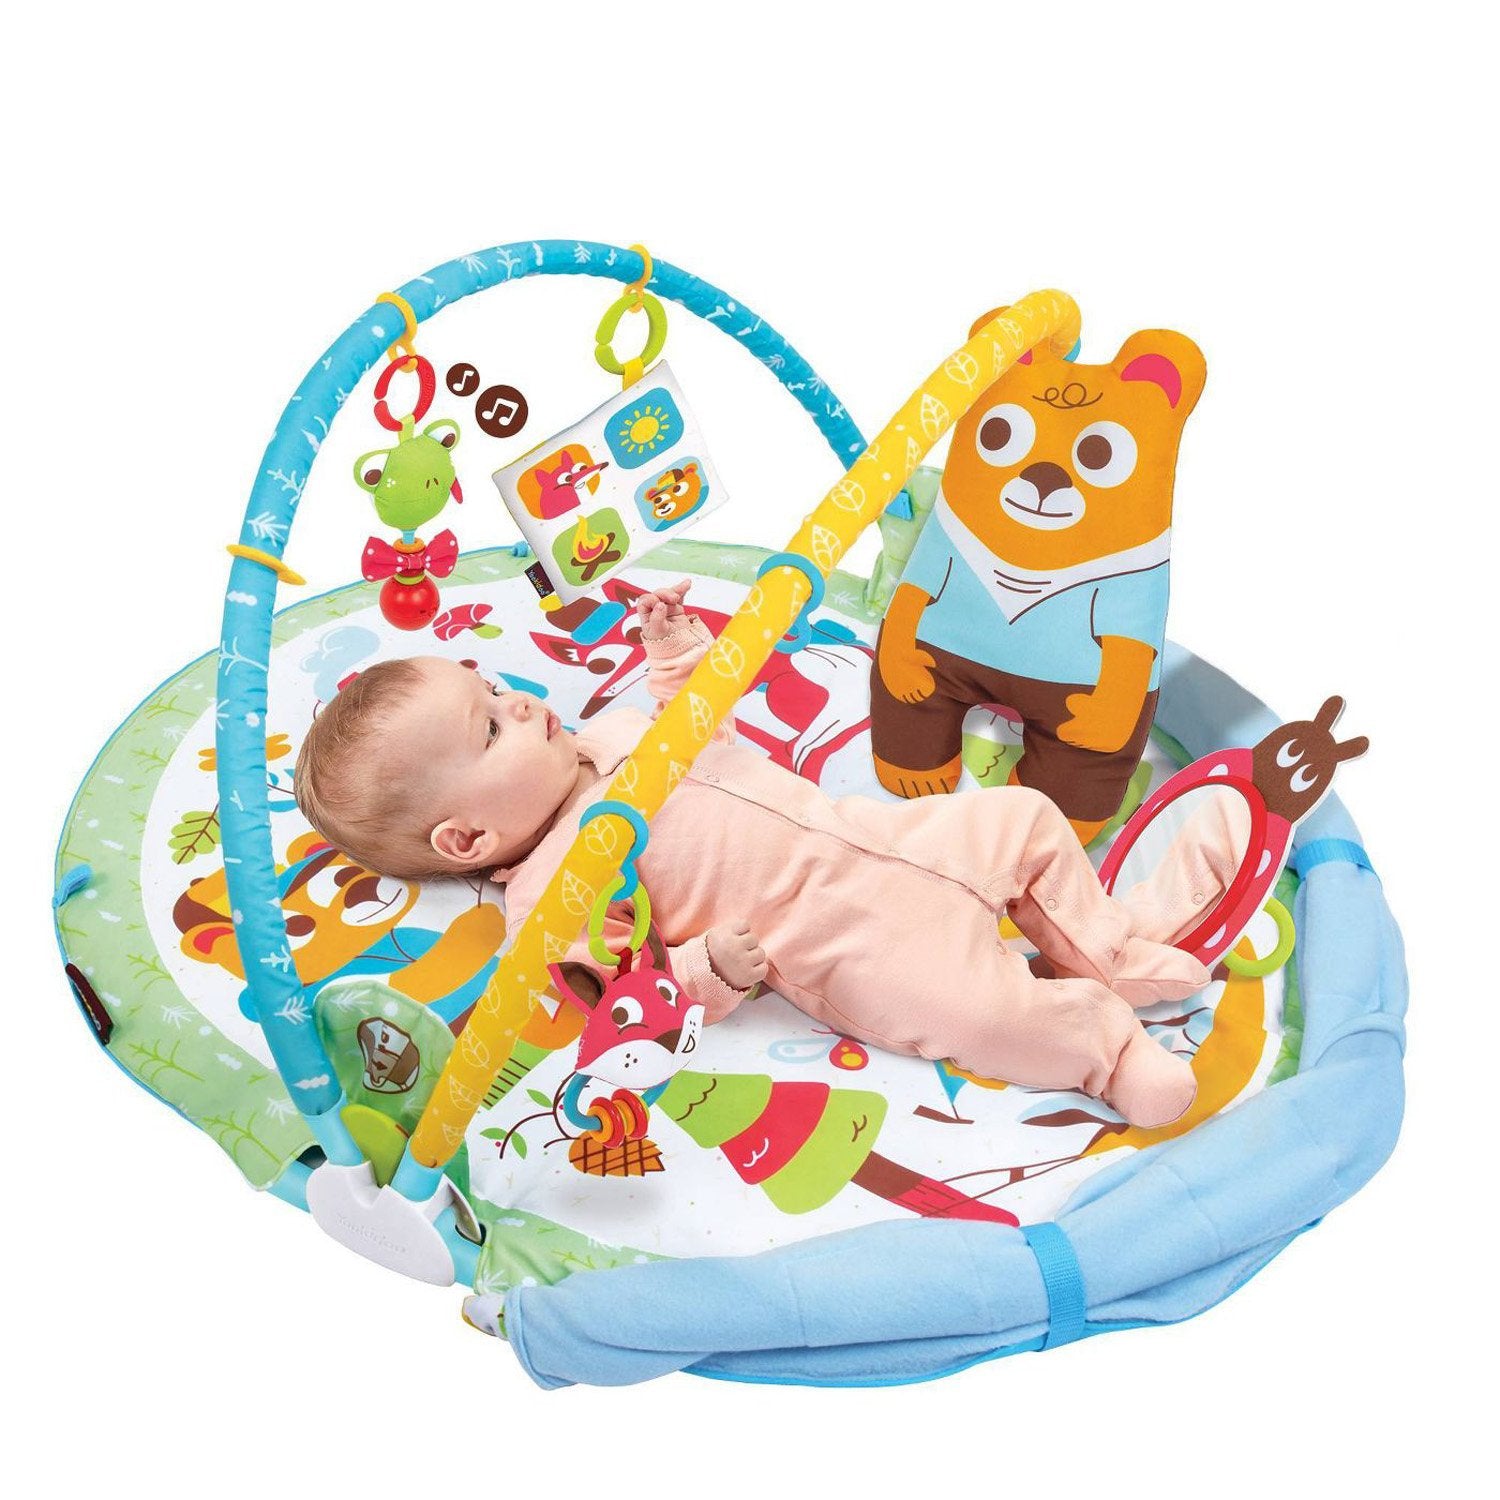 Gymotion Play N Nap Multi-function Infant Gym | Yookidoo Brand